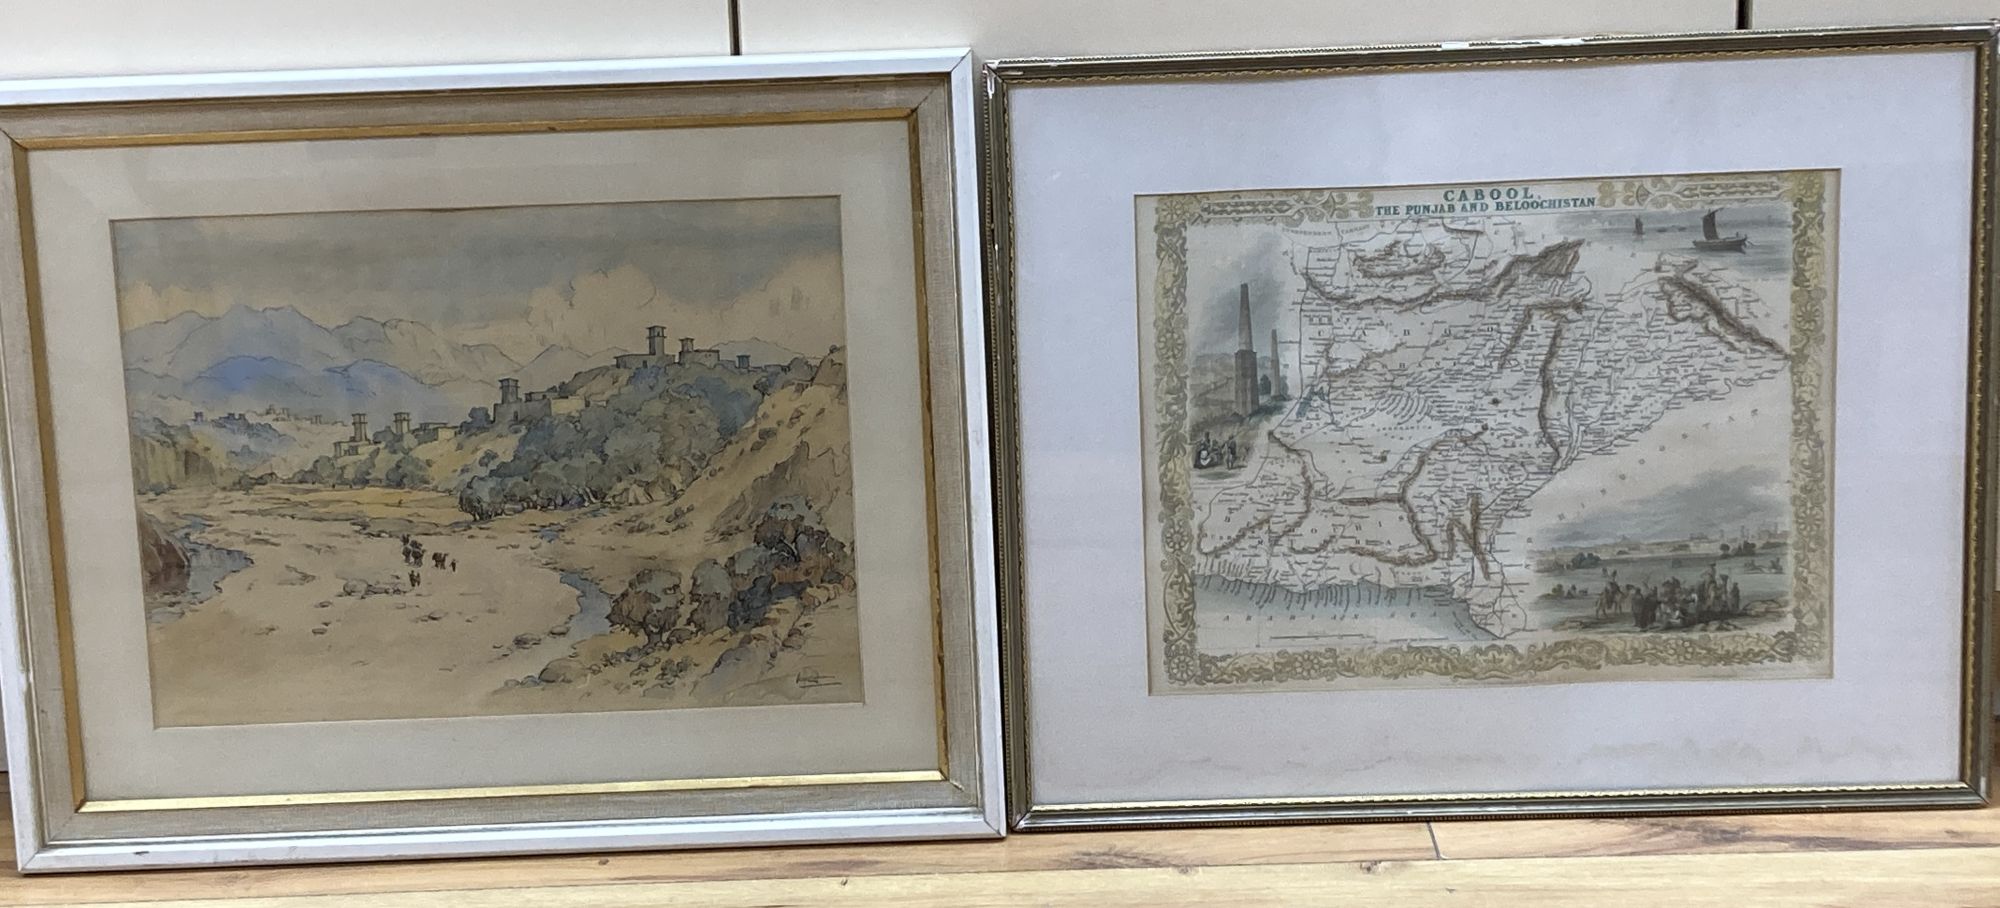 J & F Tallis, coloured engraving, Map of Cabool, The Punjab and Beloochistan and a hand coloured